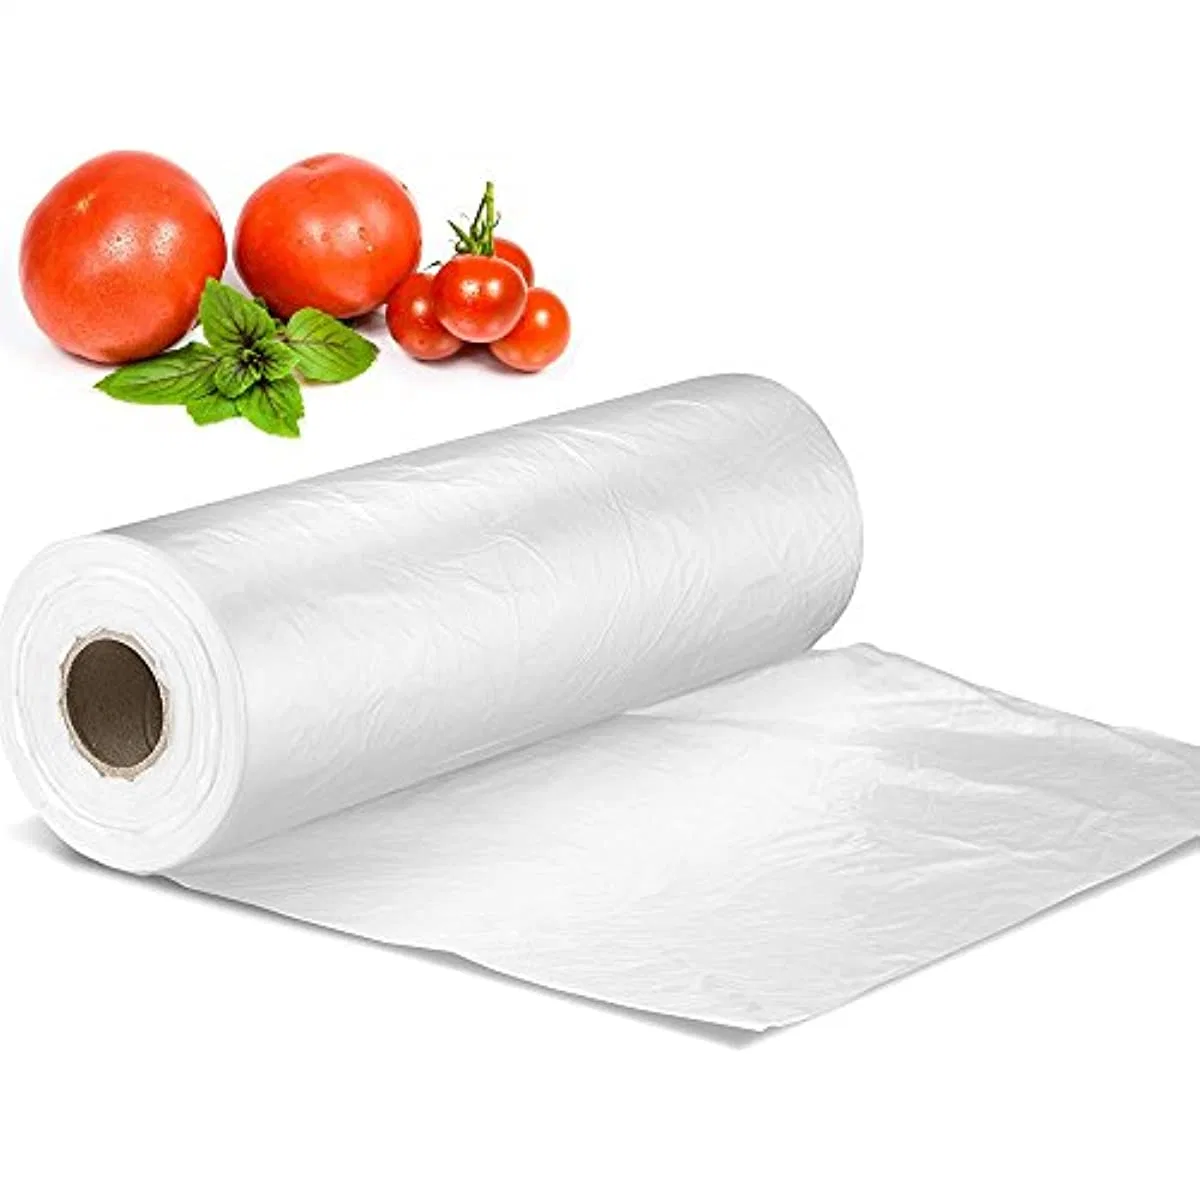 Plastic Produce Bag on a Roll, Bread and Grocery Clear Bag